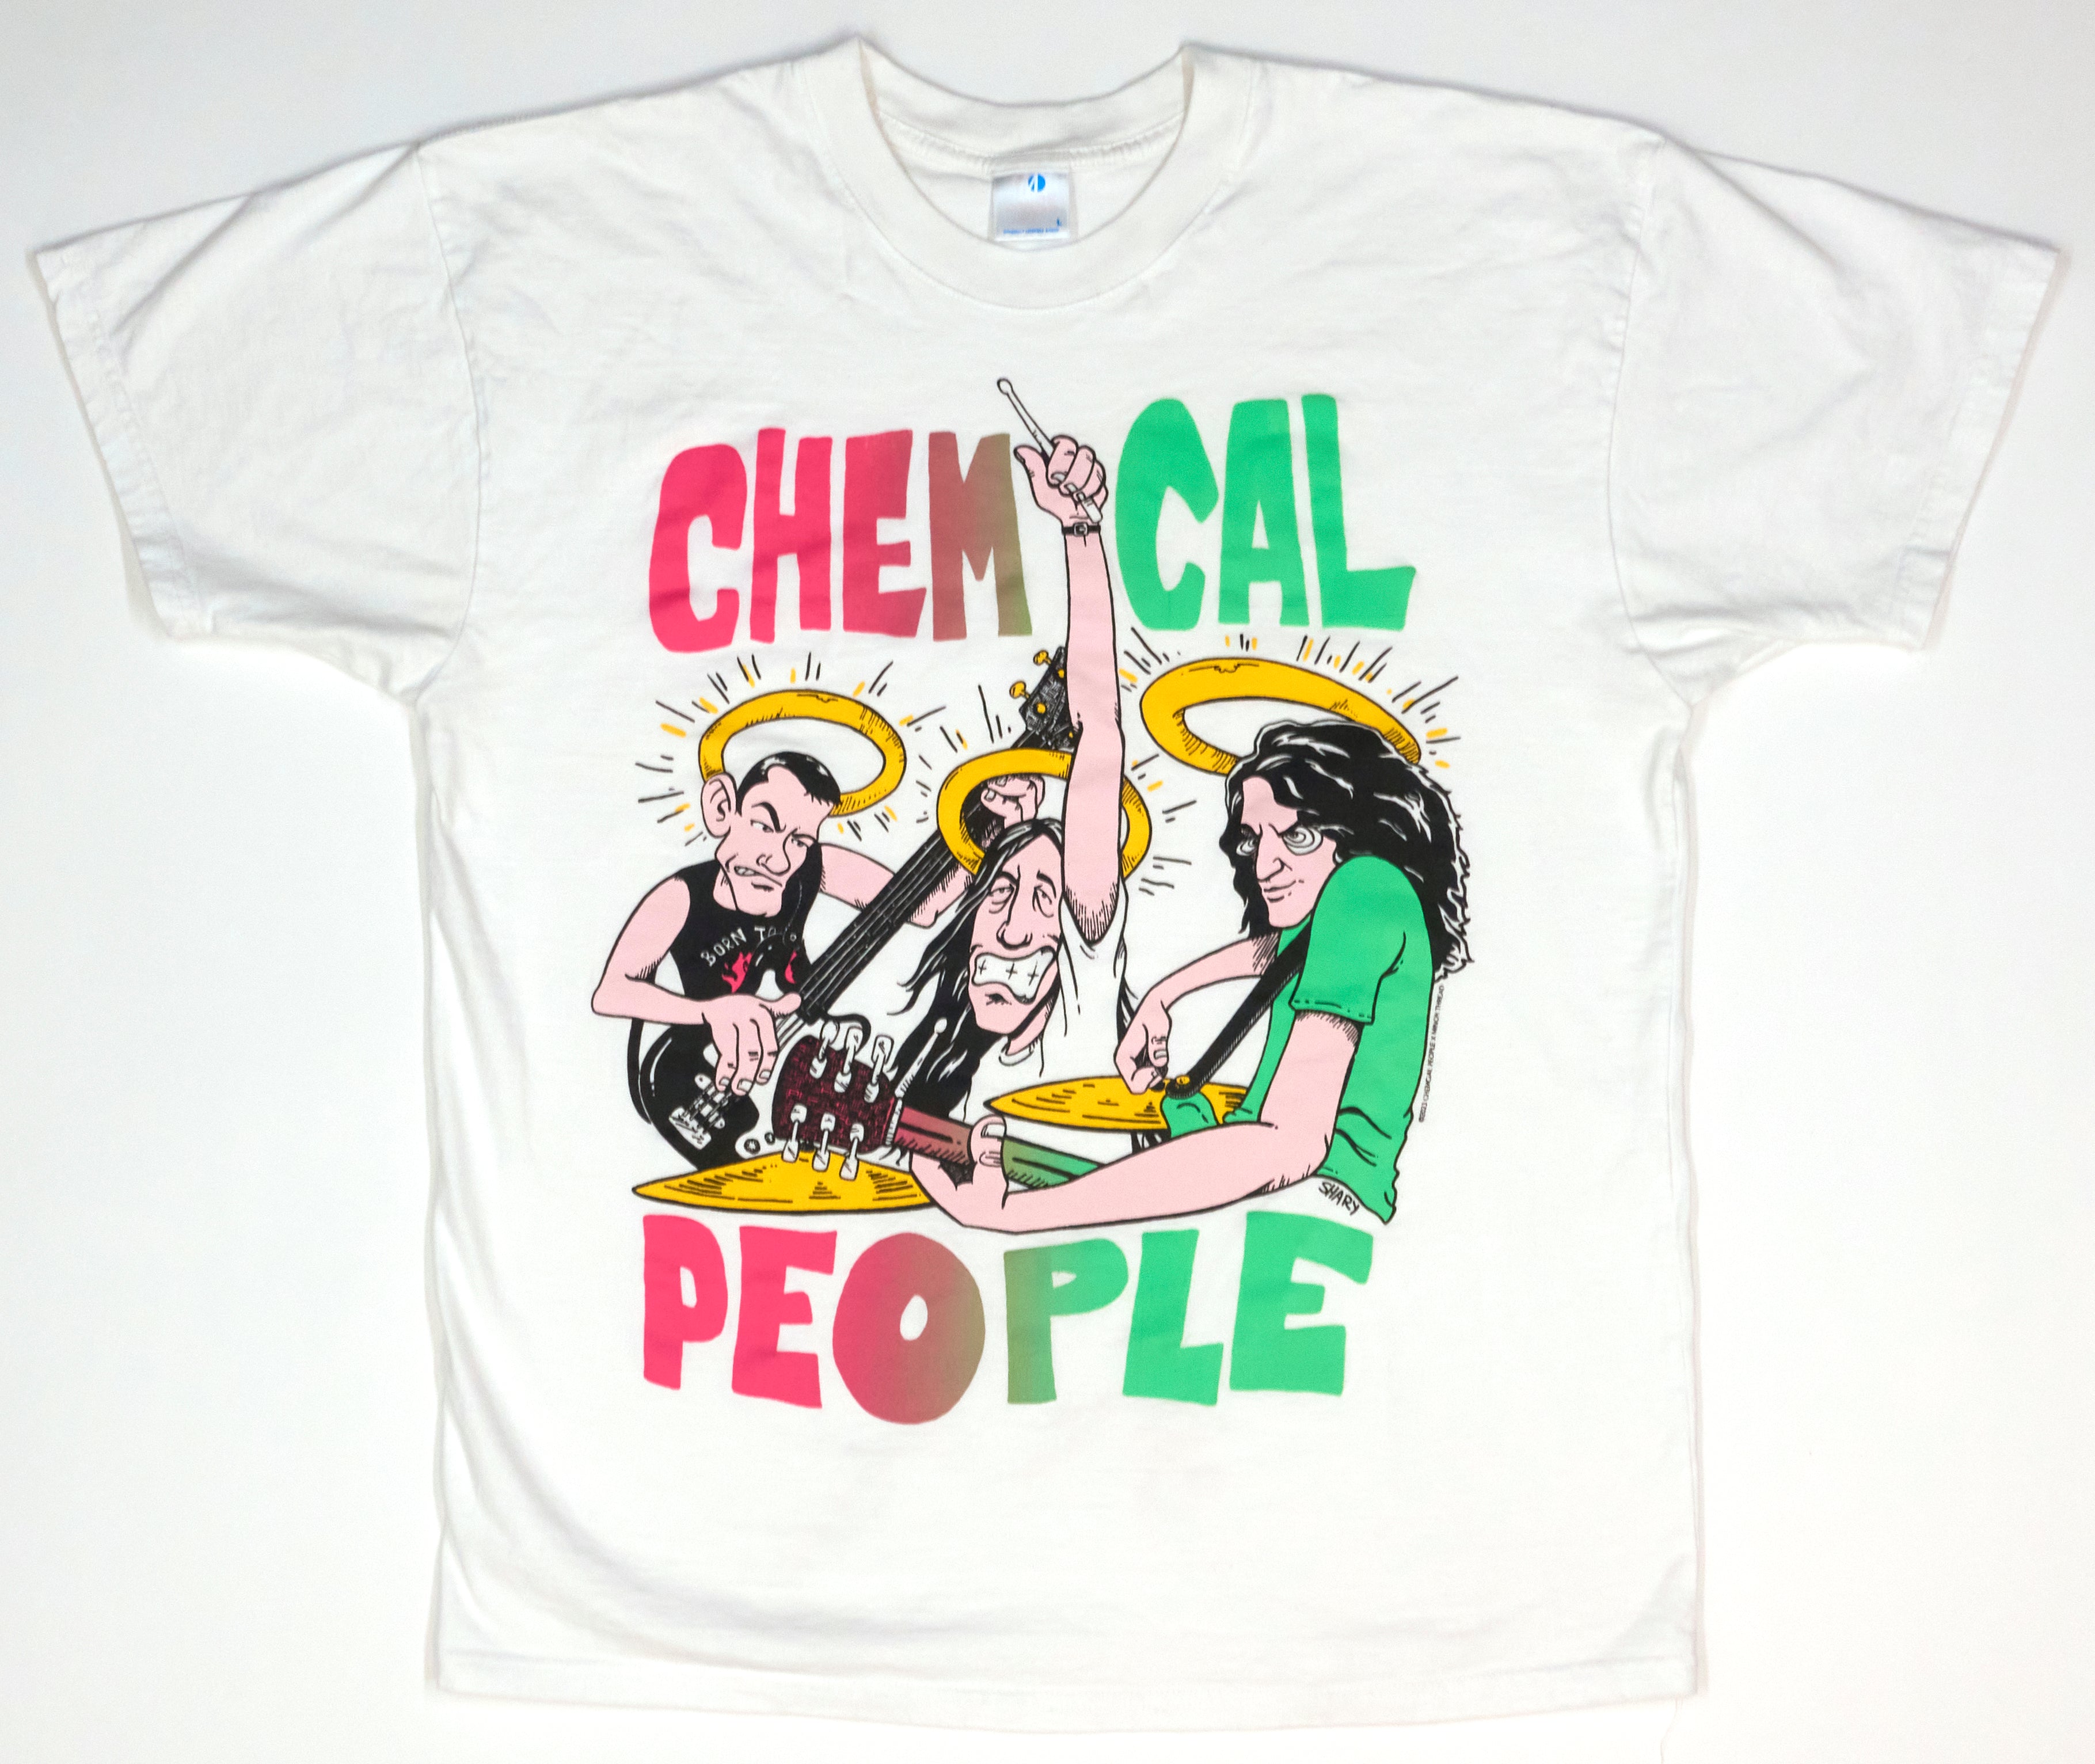 Chemical People X Minor Thread LTD - Shary Live Show Shirt Size Large